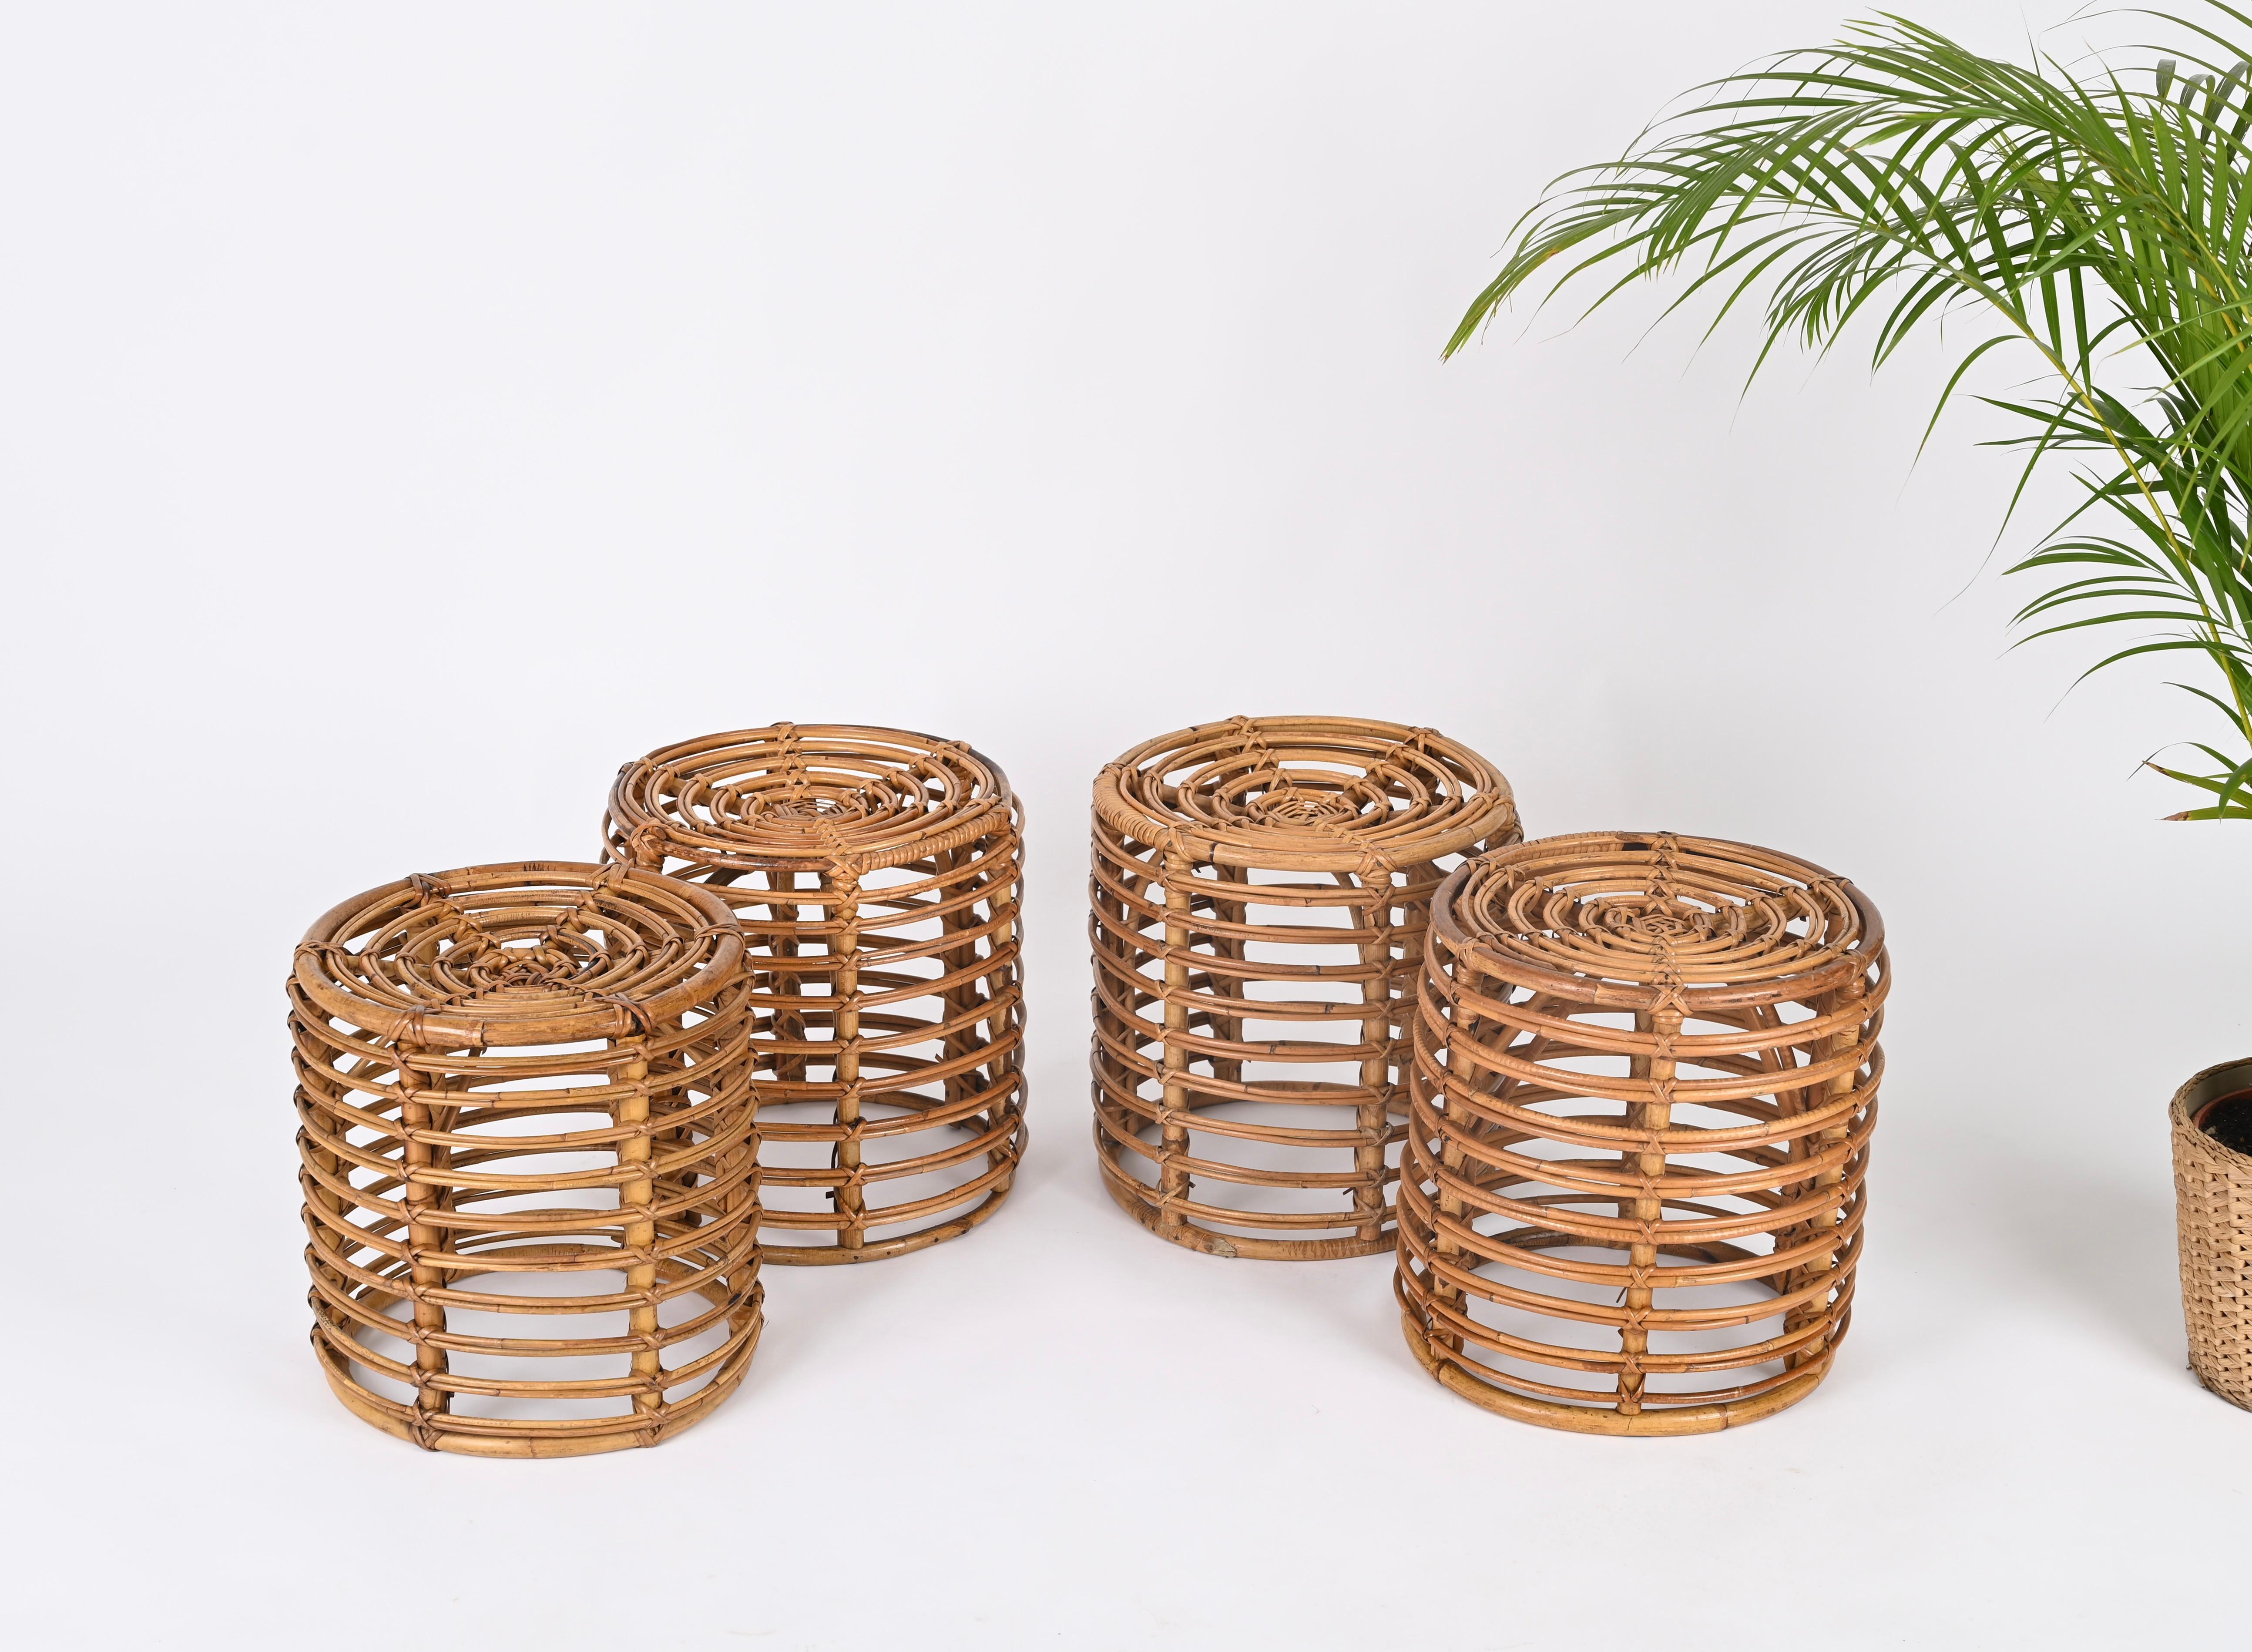 Stunning set of 4 poufs in curved rattan, hand-woven wicker and bamboo designed by Tito Agnoli. These fantastic and rare poufs were made in Italy during the 1960s.

The craftsmanship of these stools is exceptional and the curved bamboo structure